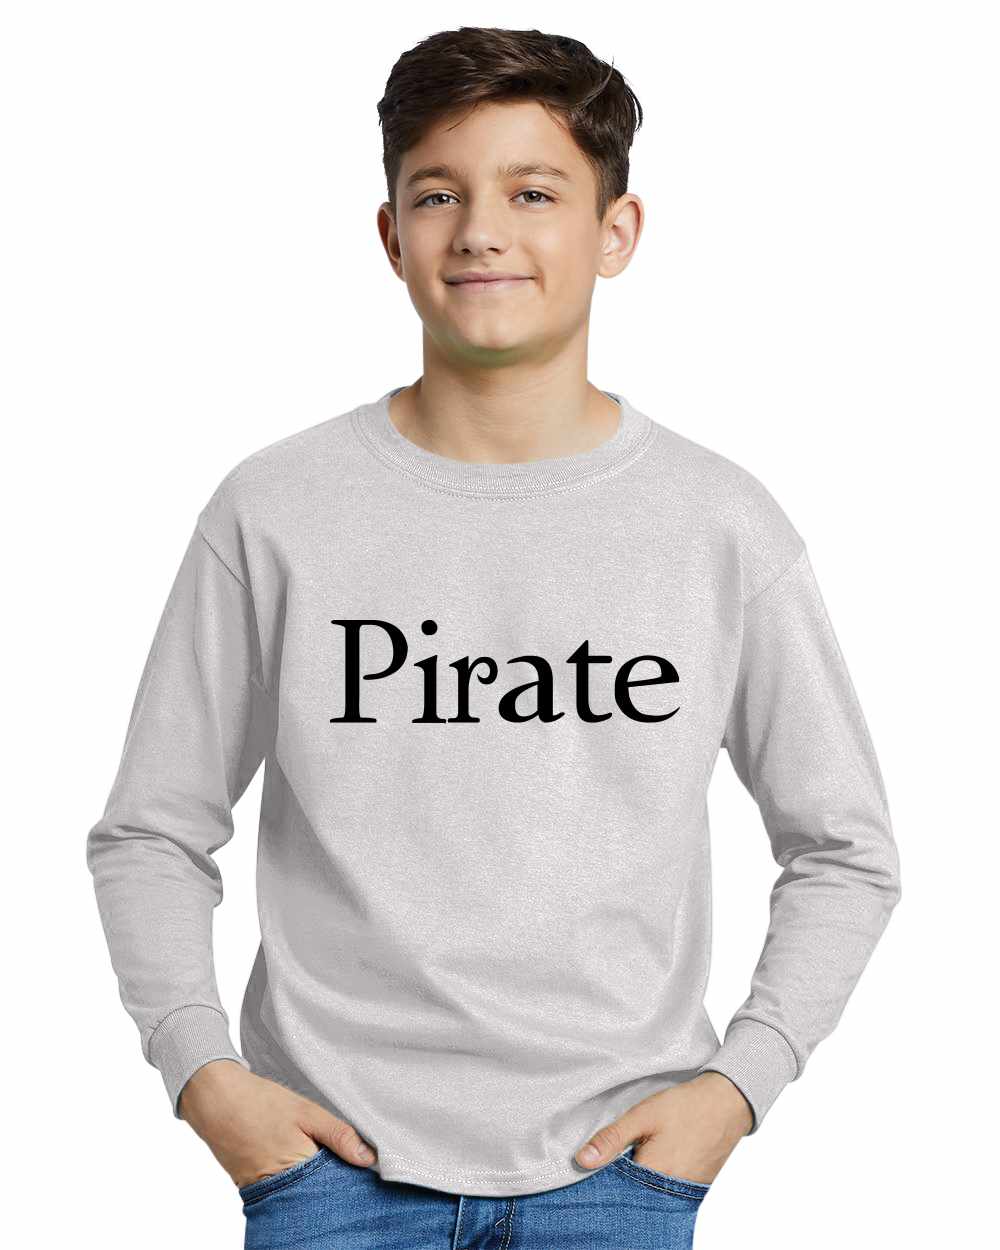 Pirate on Youth Long Sleeve Shirt (#620-203)